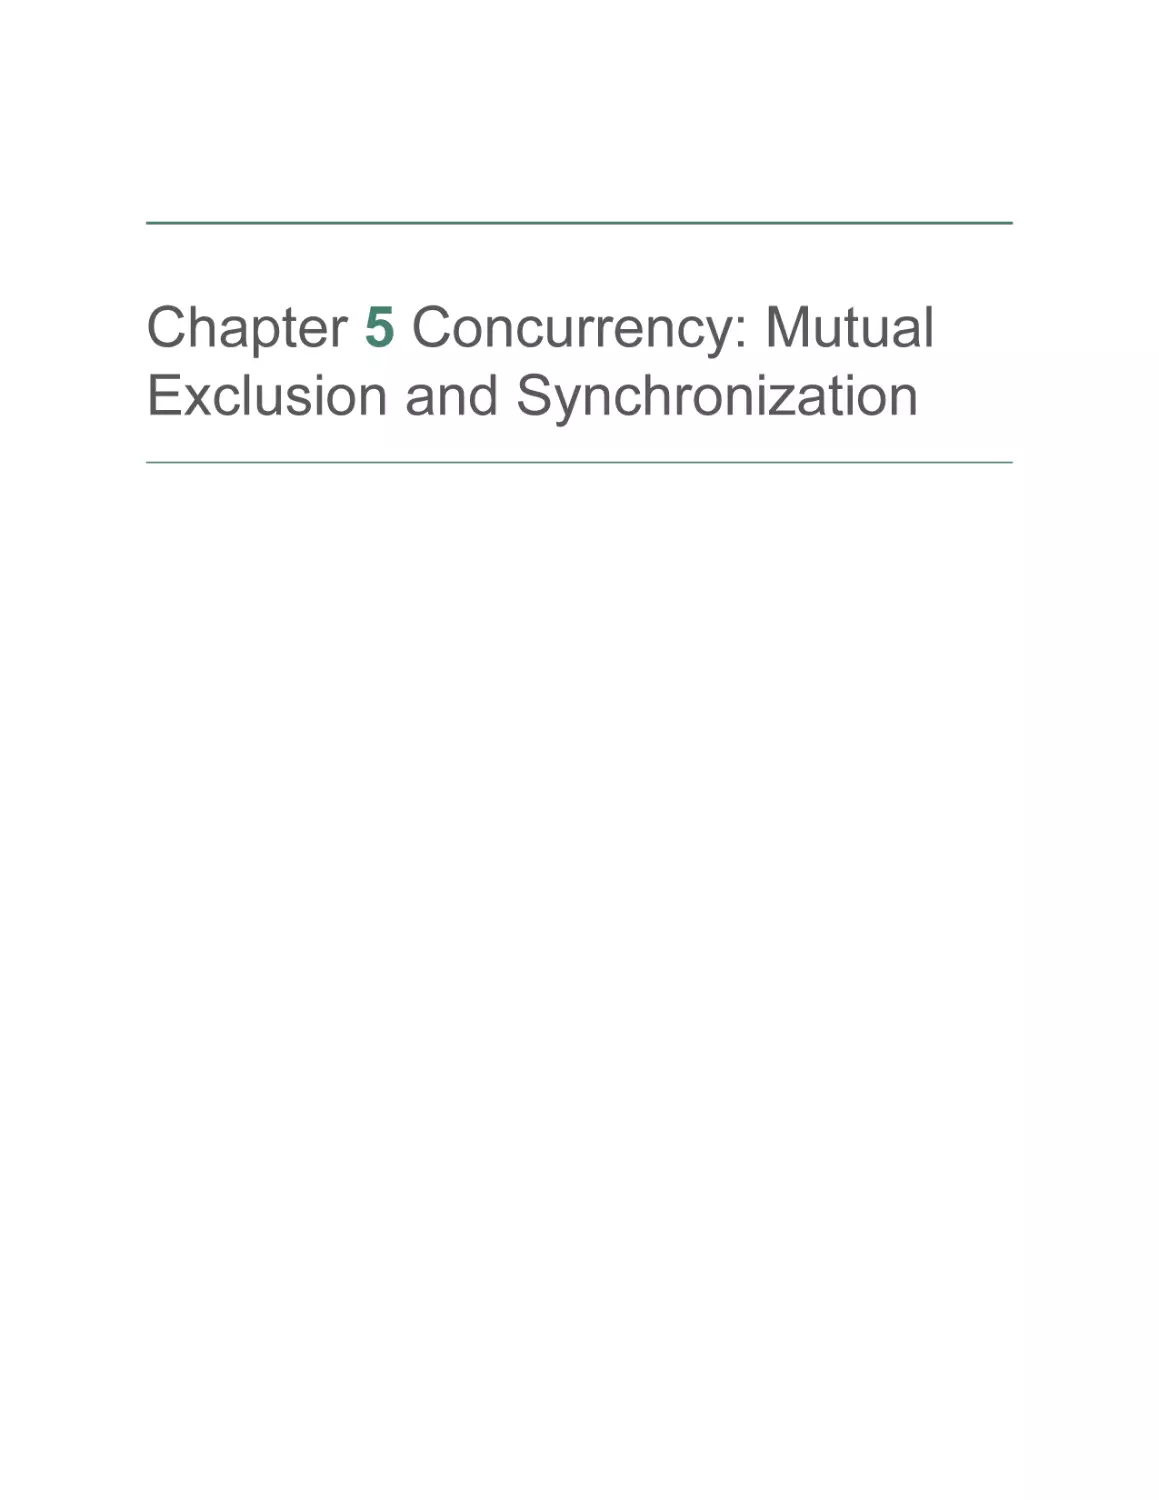 Chapter 5 Concurrency